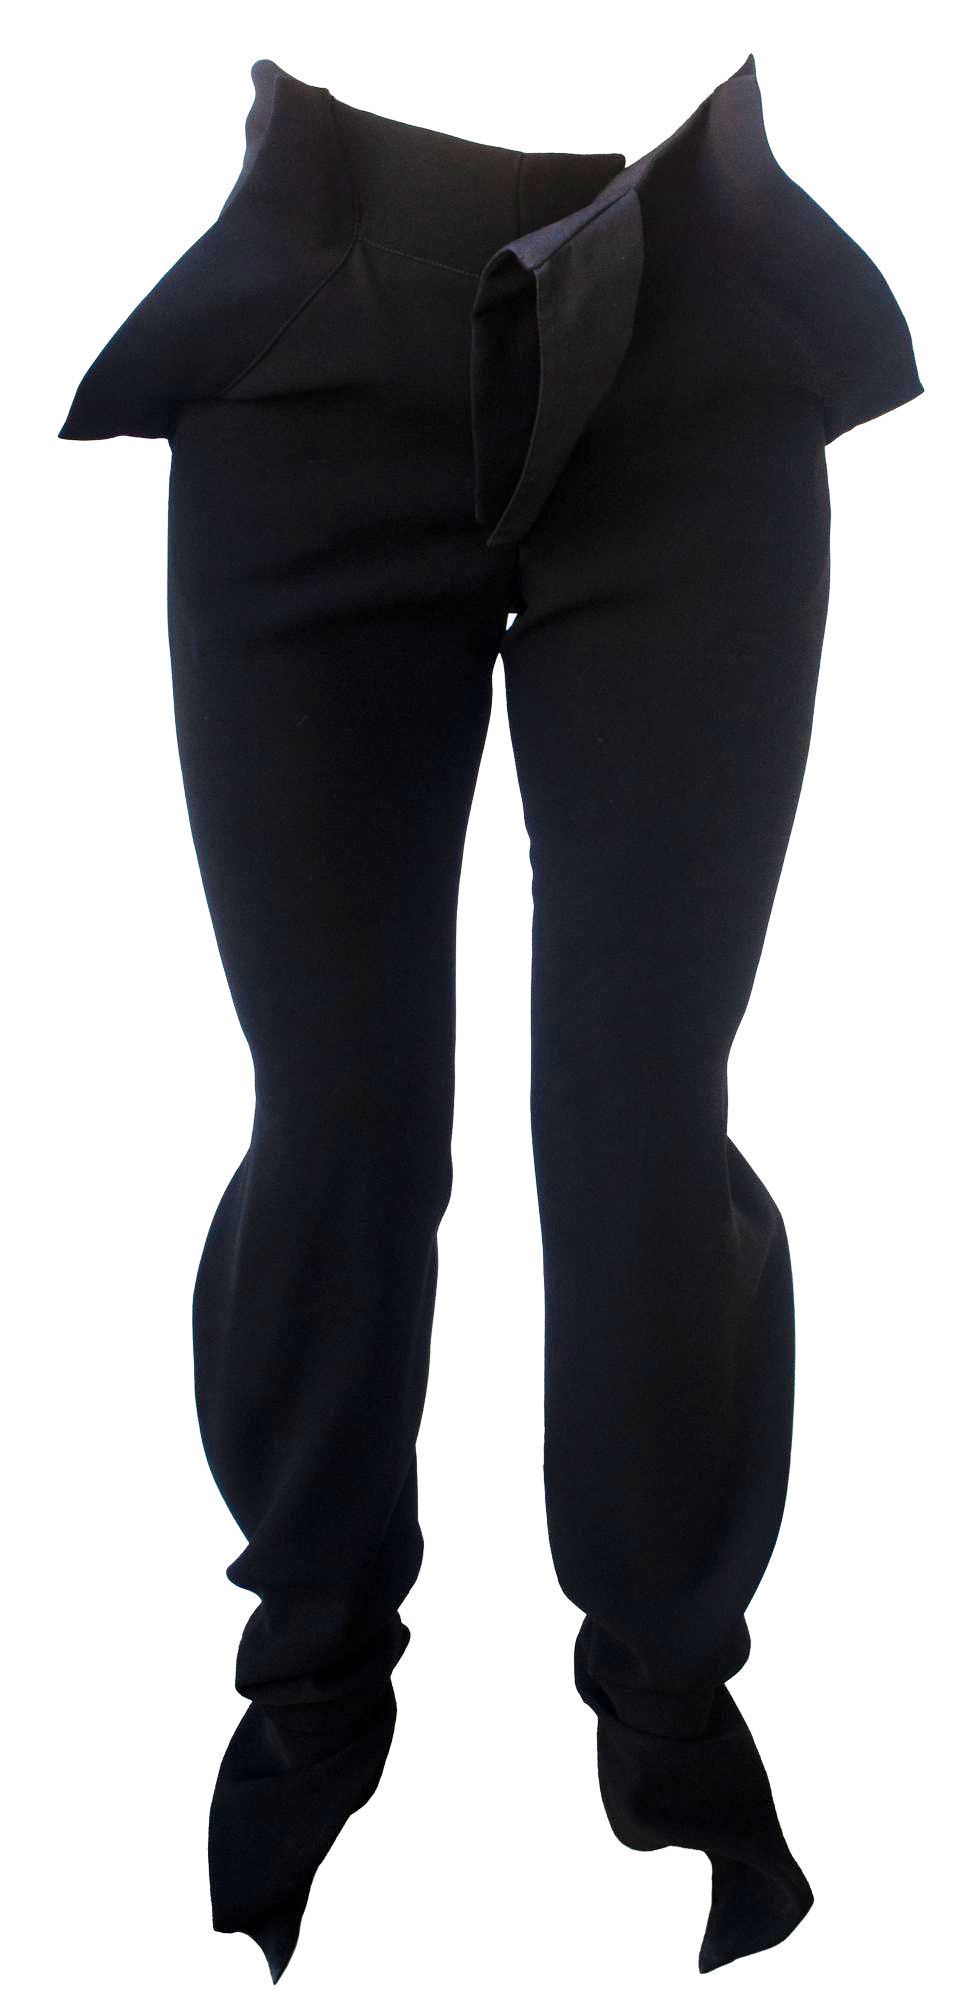 Vivienne Westwood PIRATE TROUSER Description: Black cady inserted faced with...